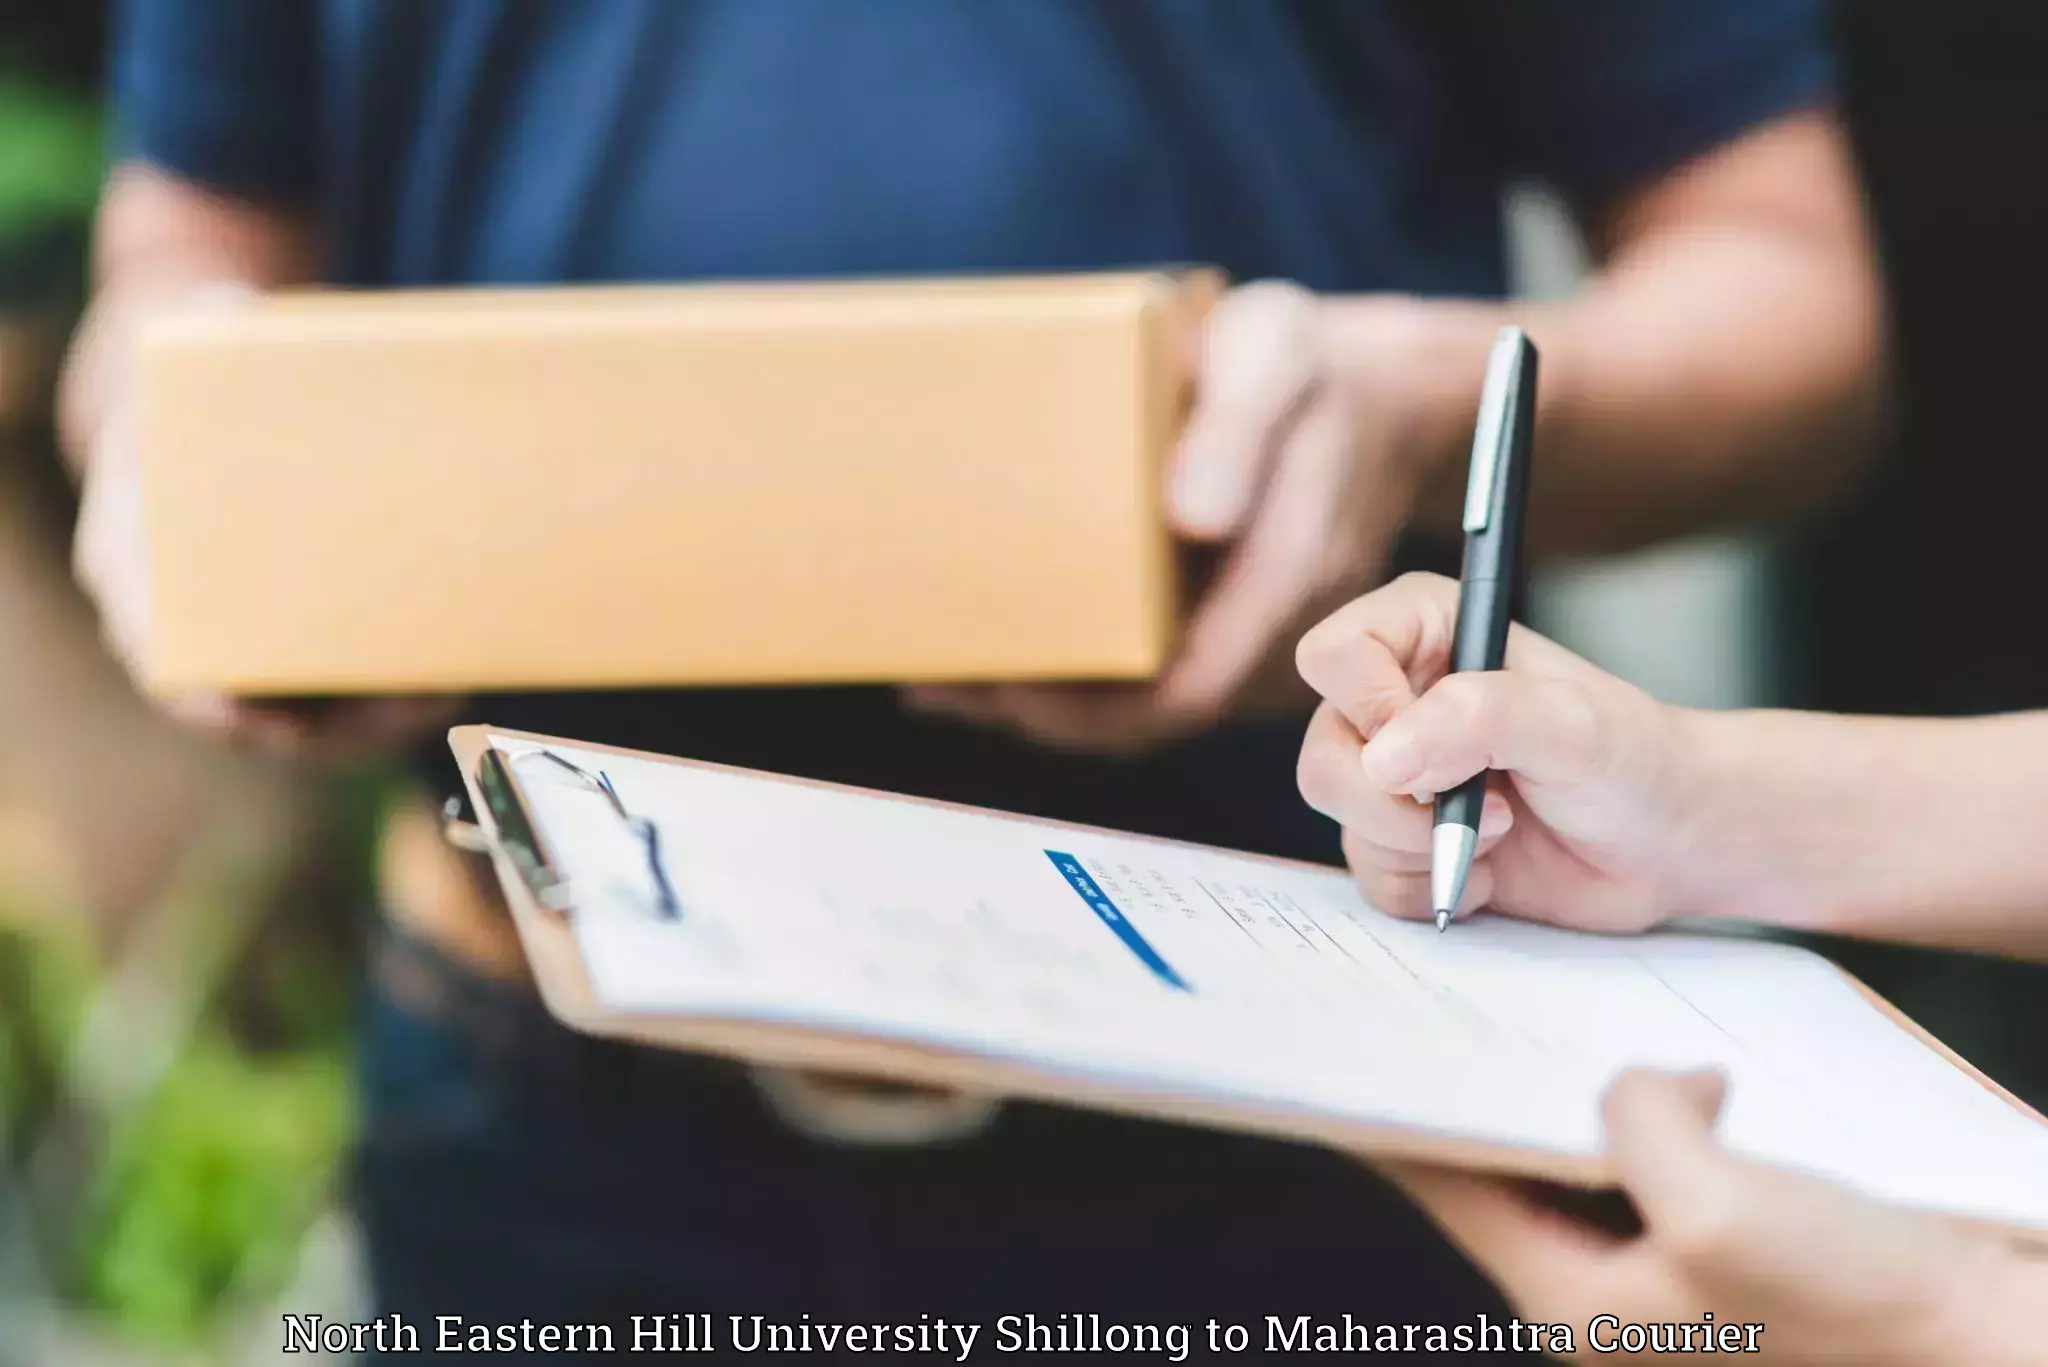 High-quality moving services North Eastern Hill University Shillong to Alibag